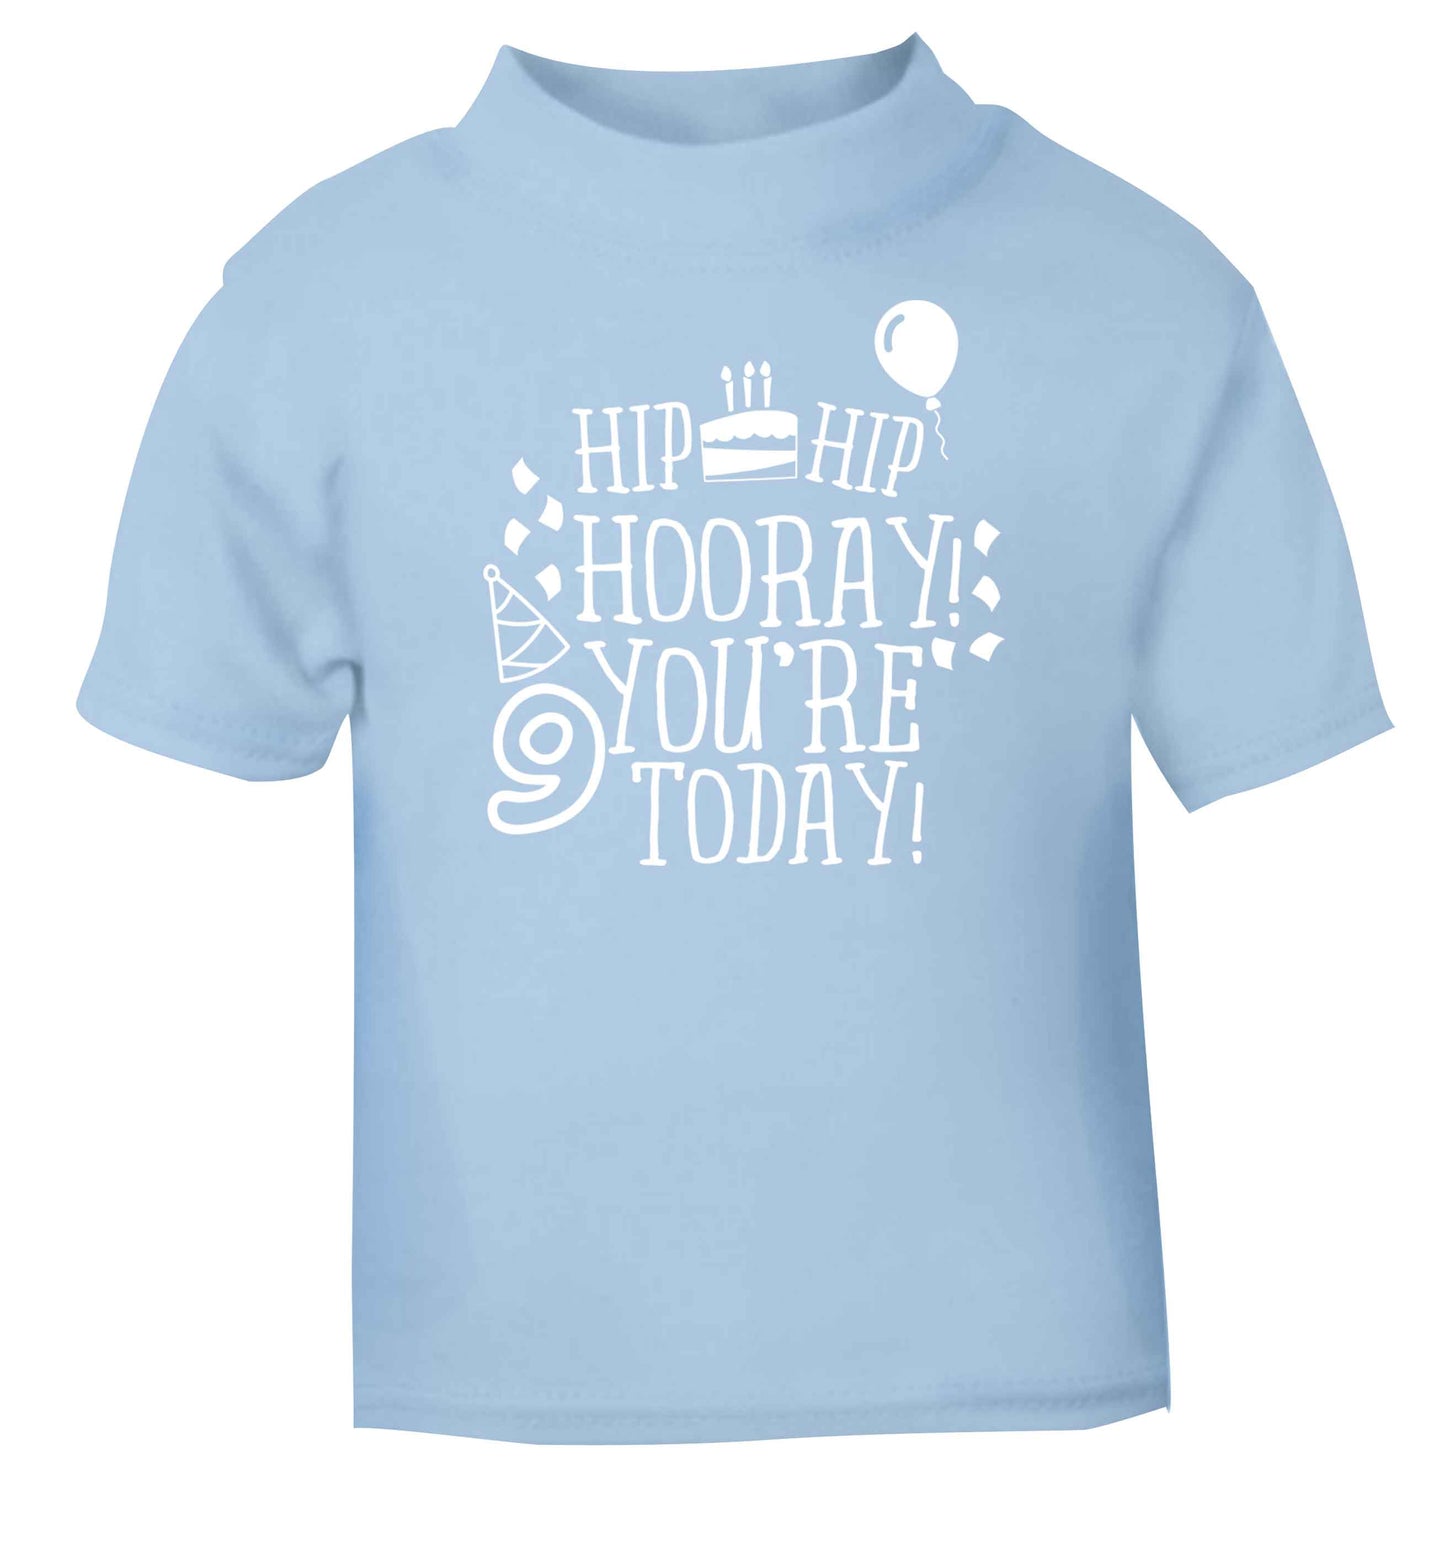 Hip hip hooray you're 9 today! light blue baby toddler Tshirt 2 Years